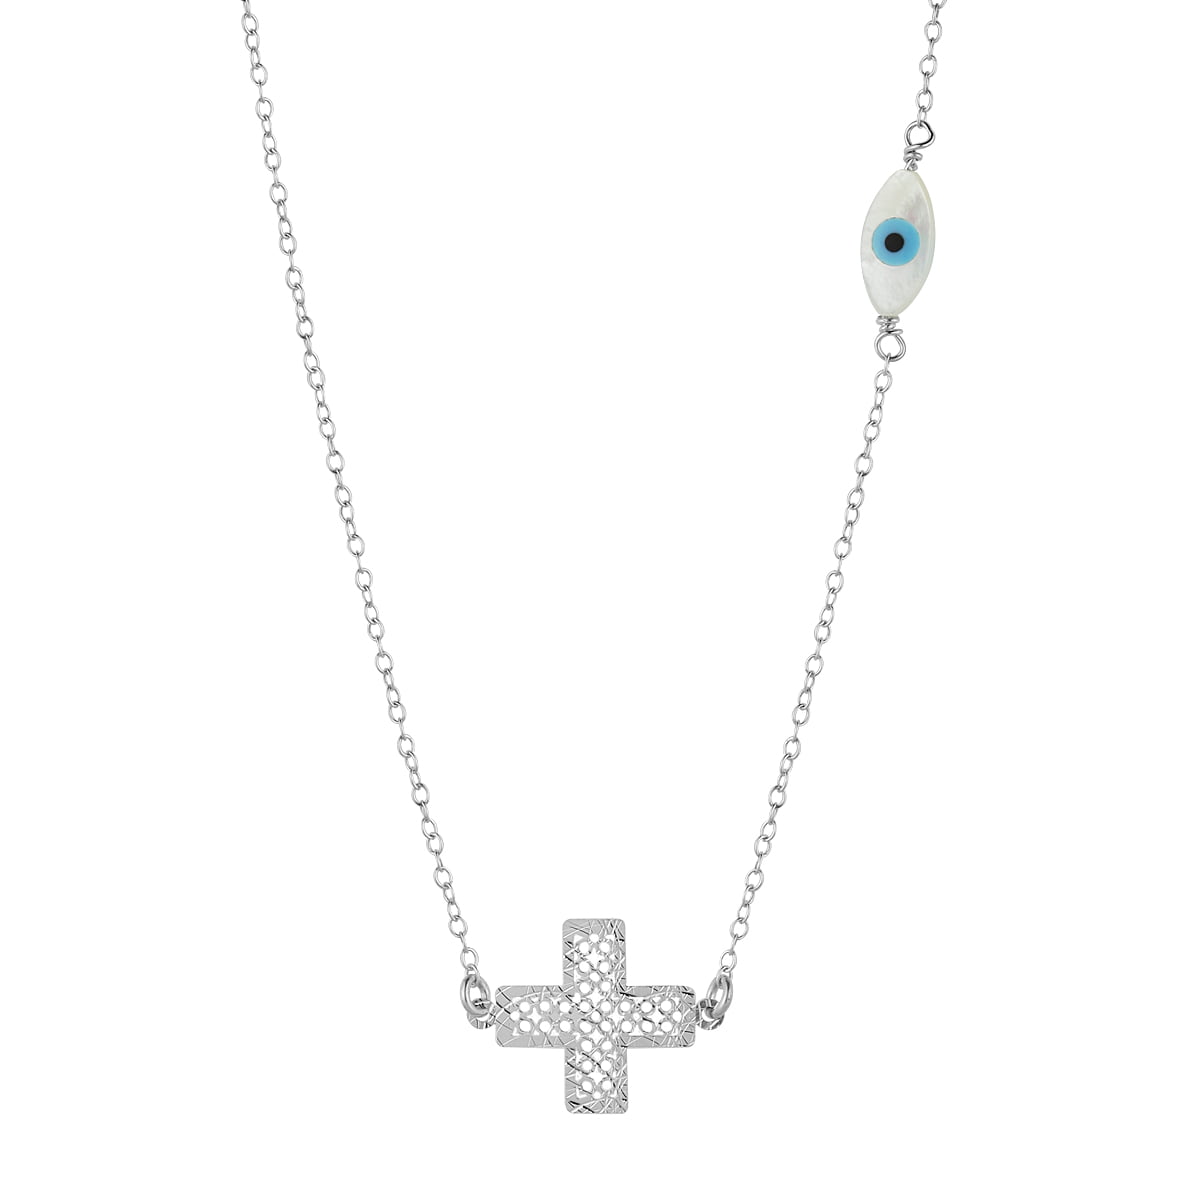 Handmade necklace made of silver 925 with cross and peephole